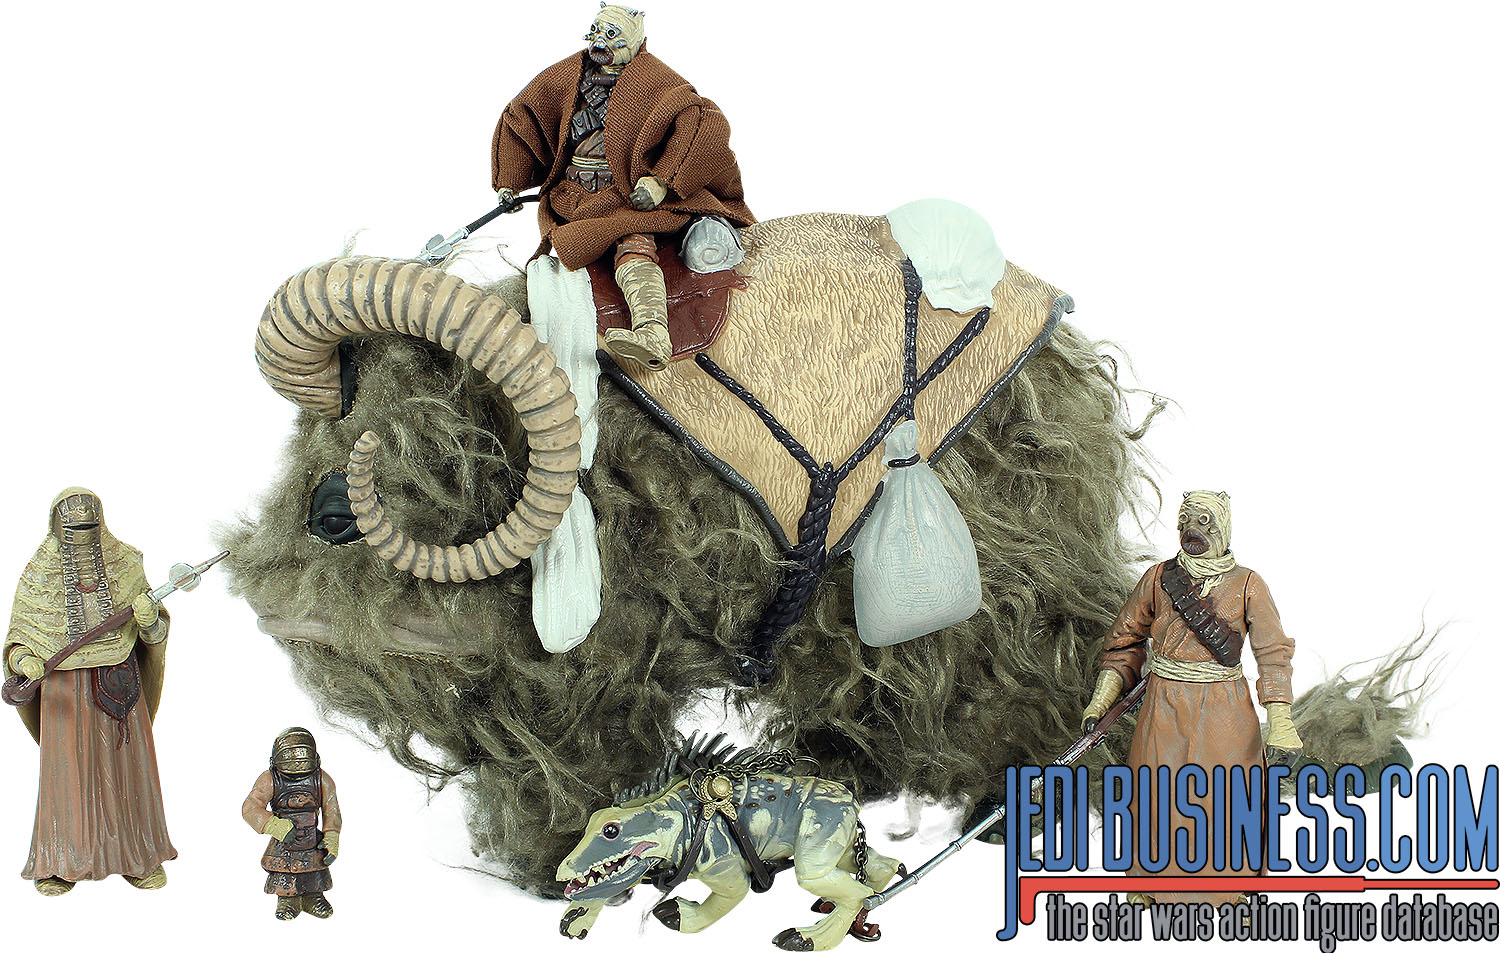 Massiff Bantha With Tusken Raiders 5-Pack #2